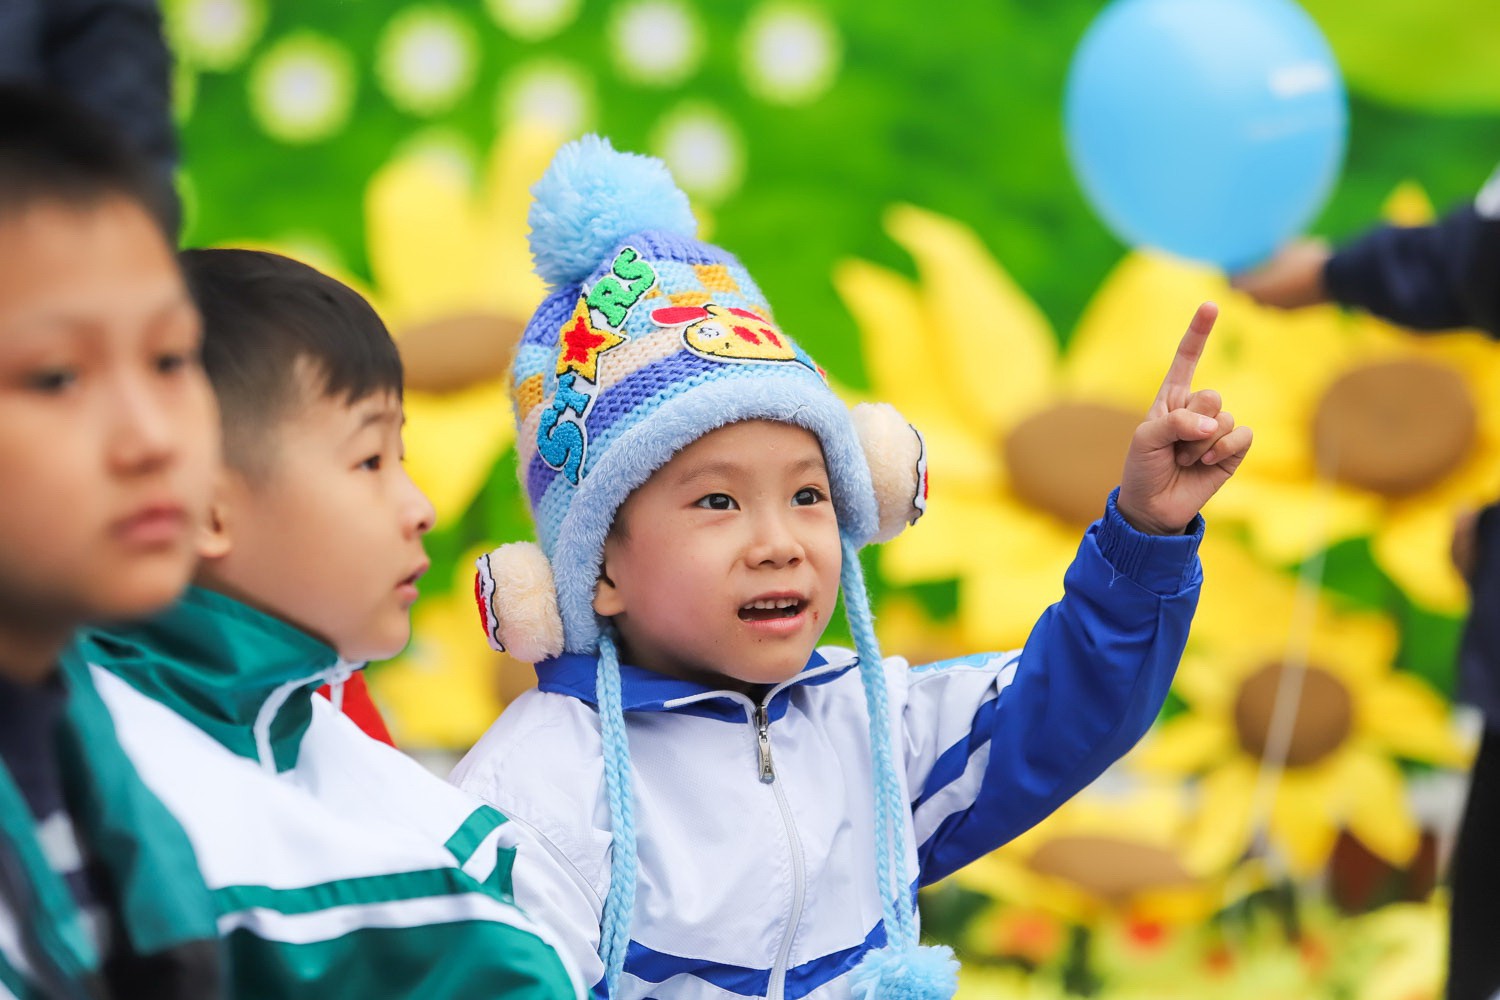 A young boy with cancer enjoys the “Sunflower Festival” at the Hanoi Children’s Palace.